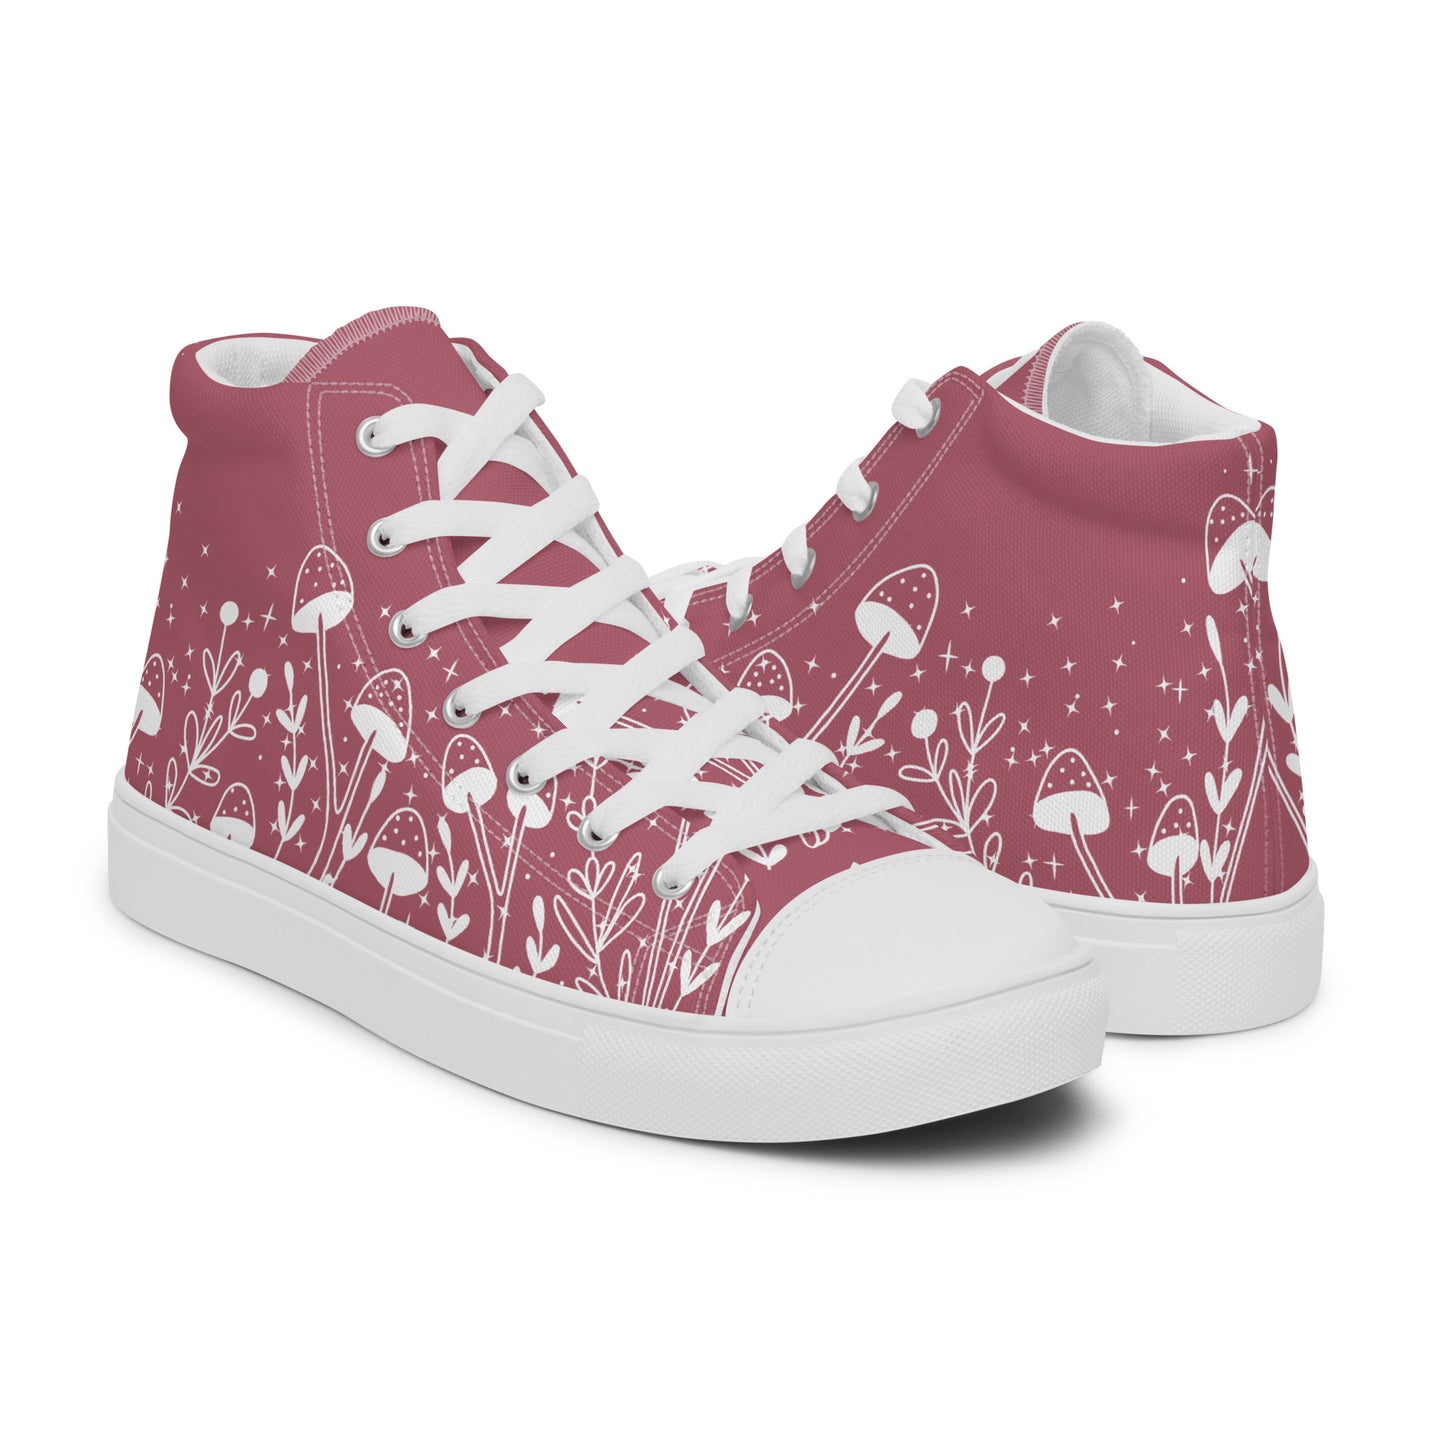 Fungi Star Petal Pink Women’s High Top Canvas Shoes